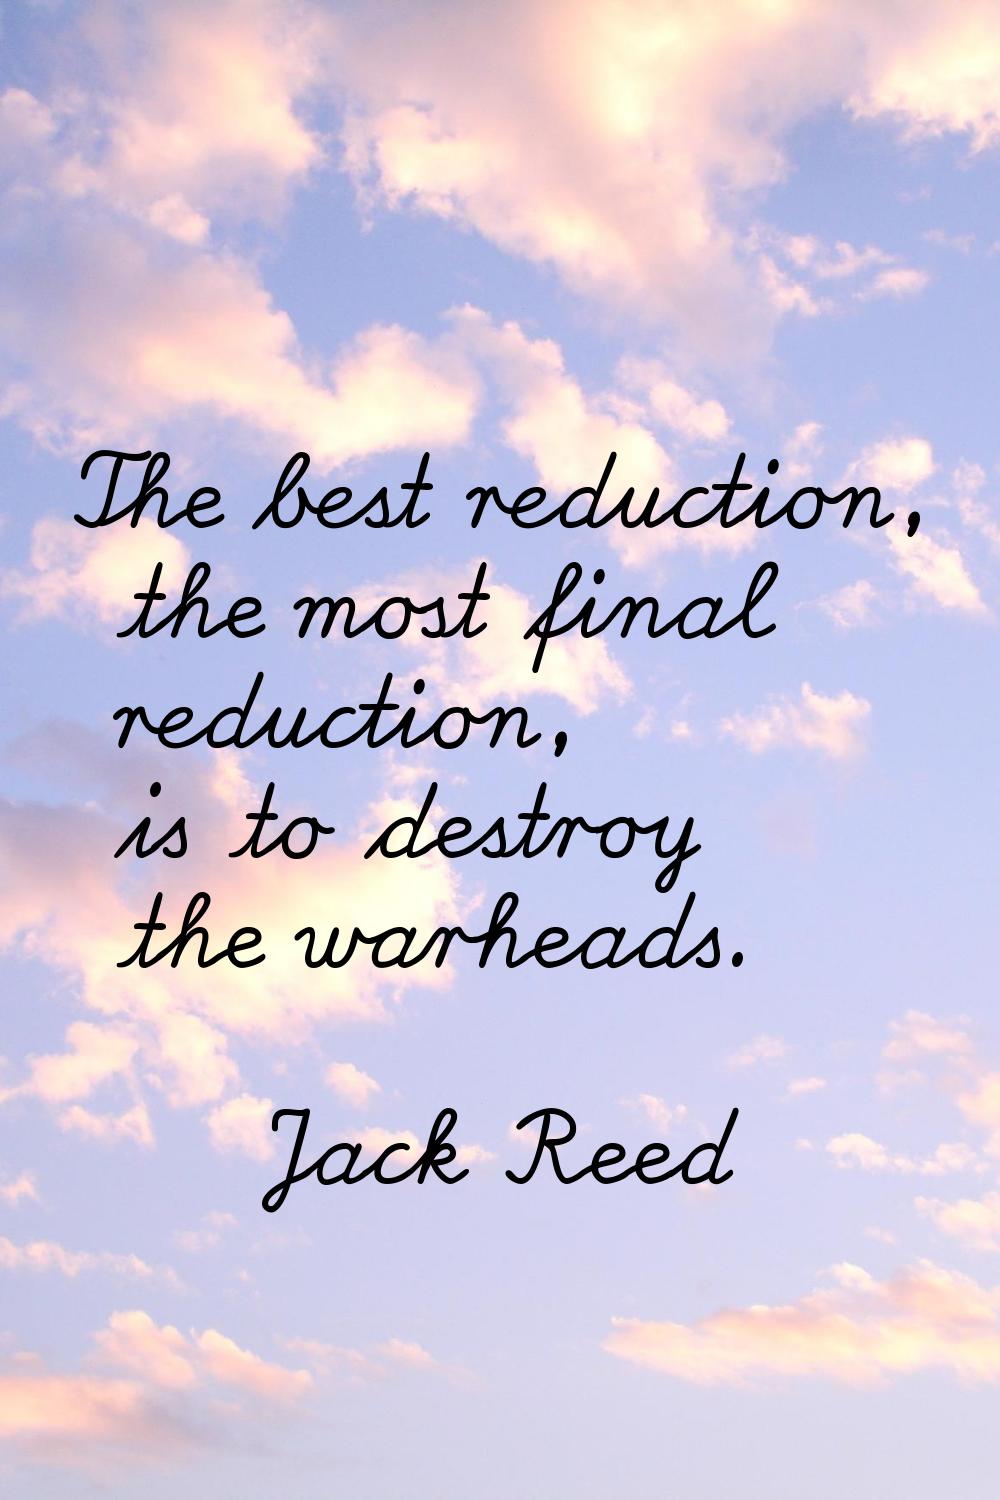 The best reduction, the most final reduction, is to destroy the warheads.